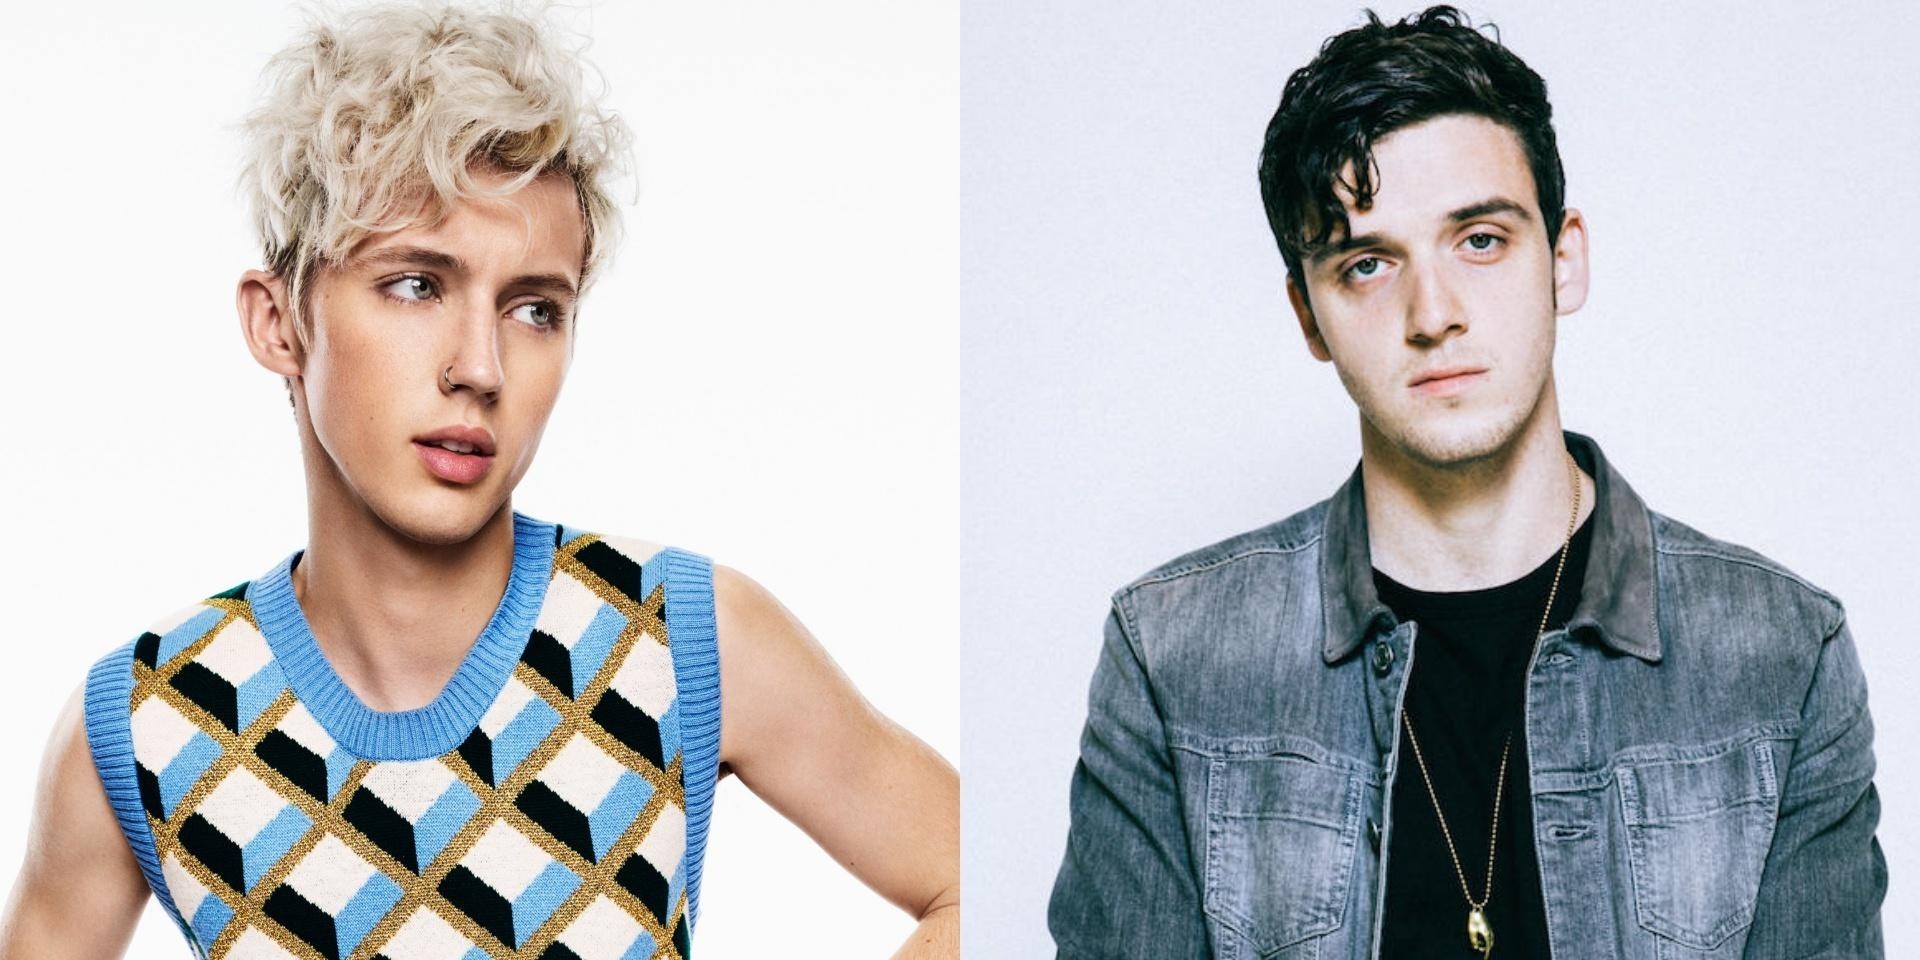 Troye Sivan and Lauv release collaborative single 'I'm So Tired...' – listen